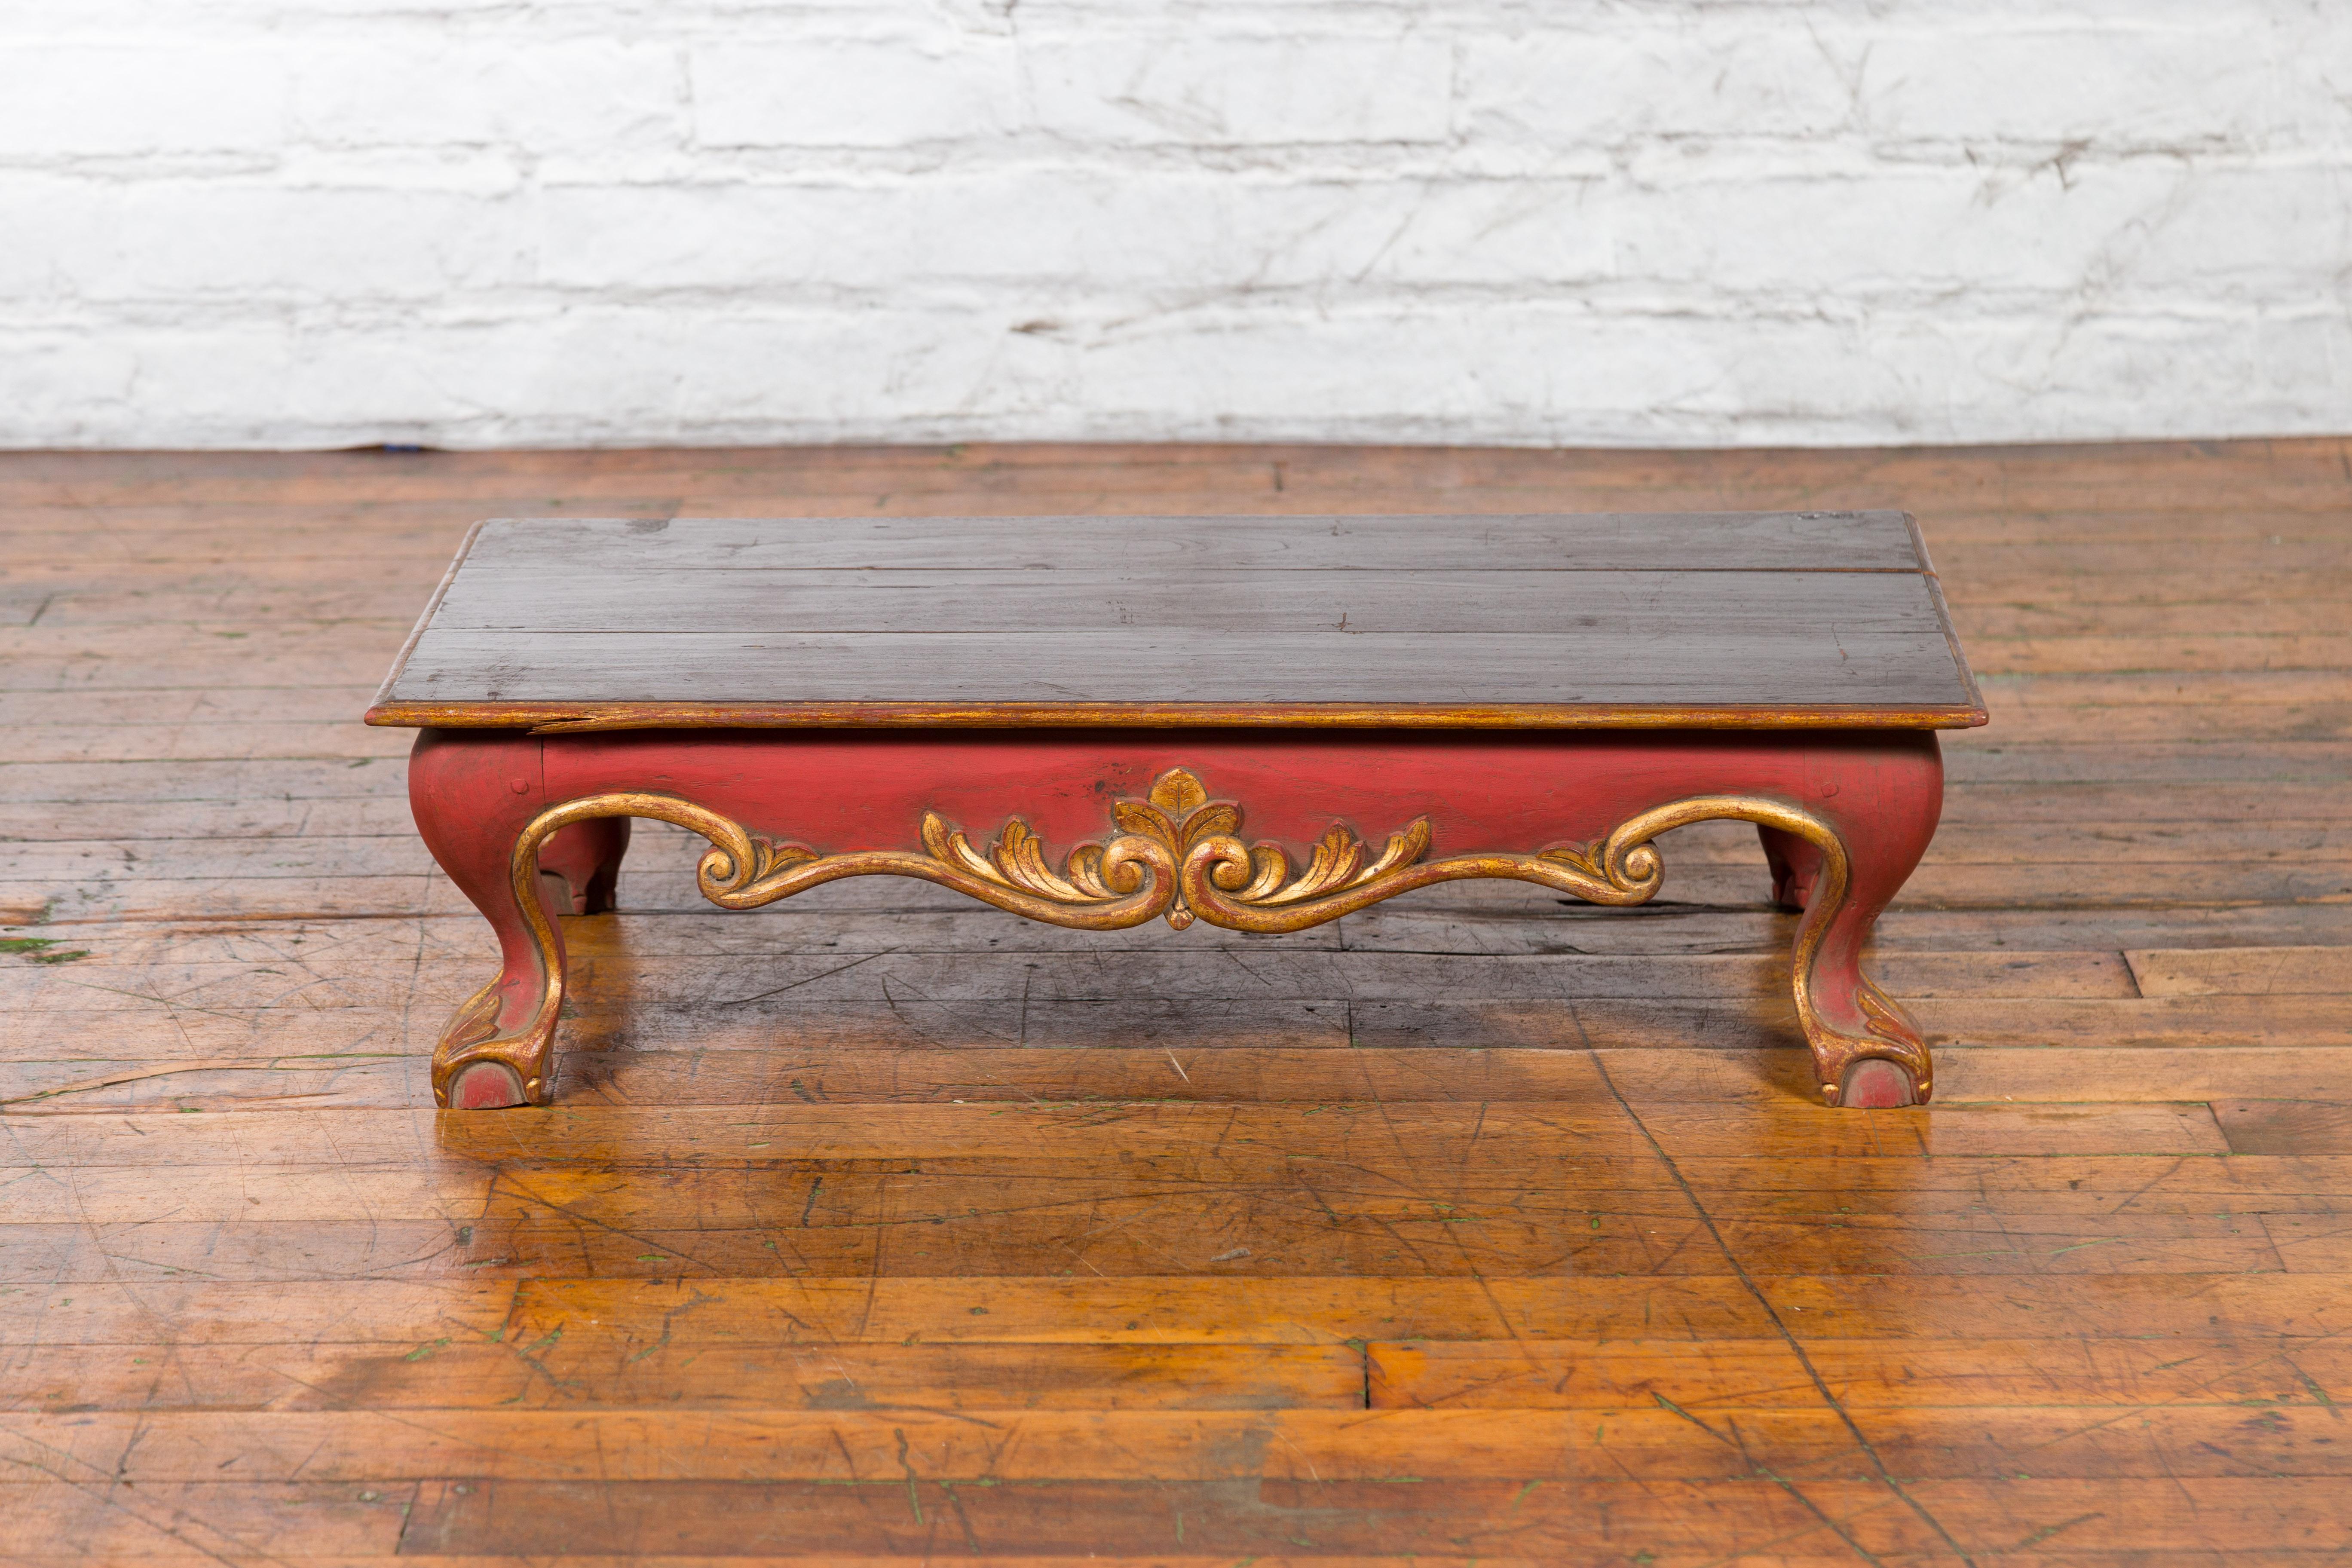 Indonesian Vintage Rococo Style Red and Gold Low Table with Ball-and-claw Feet For Sale 6